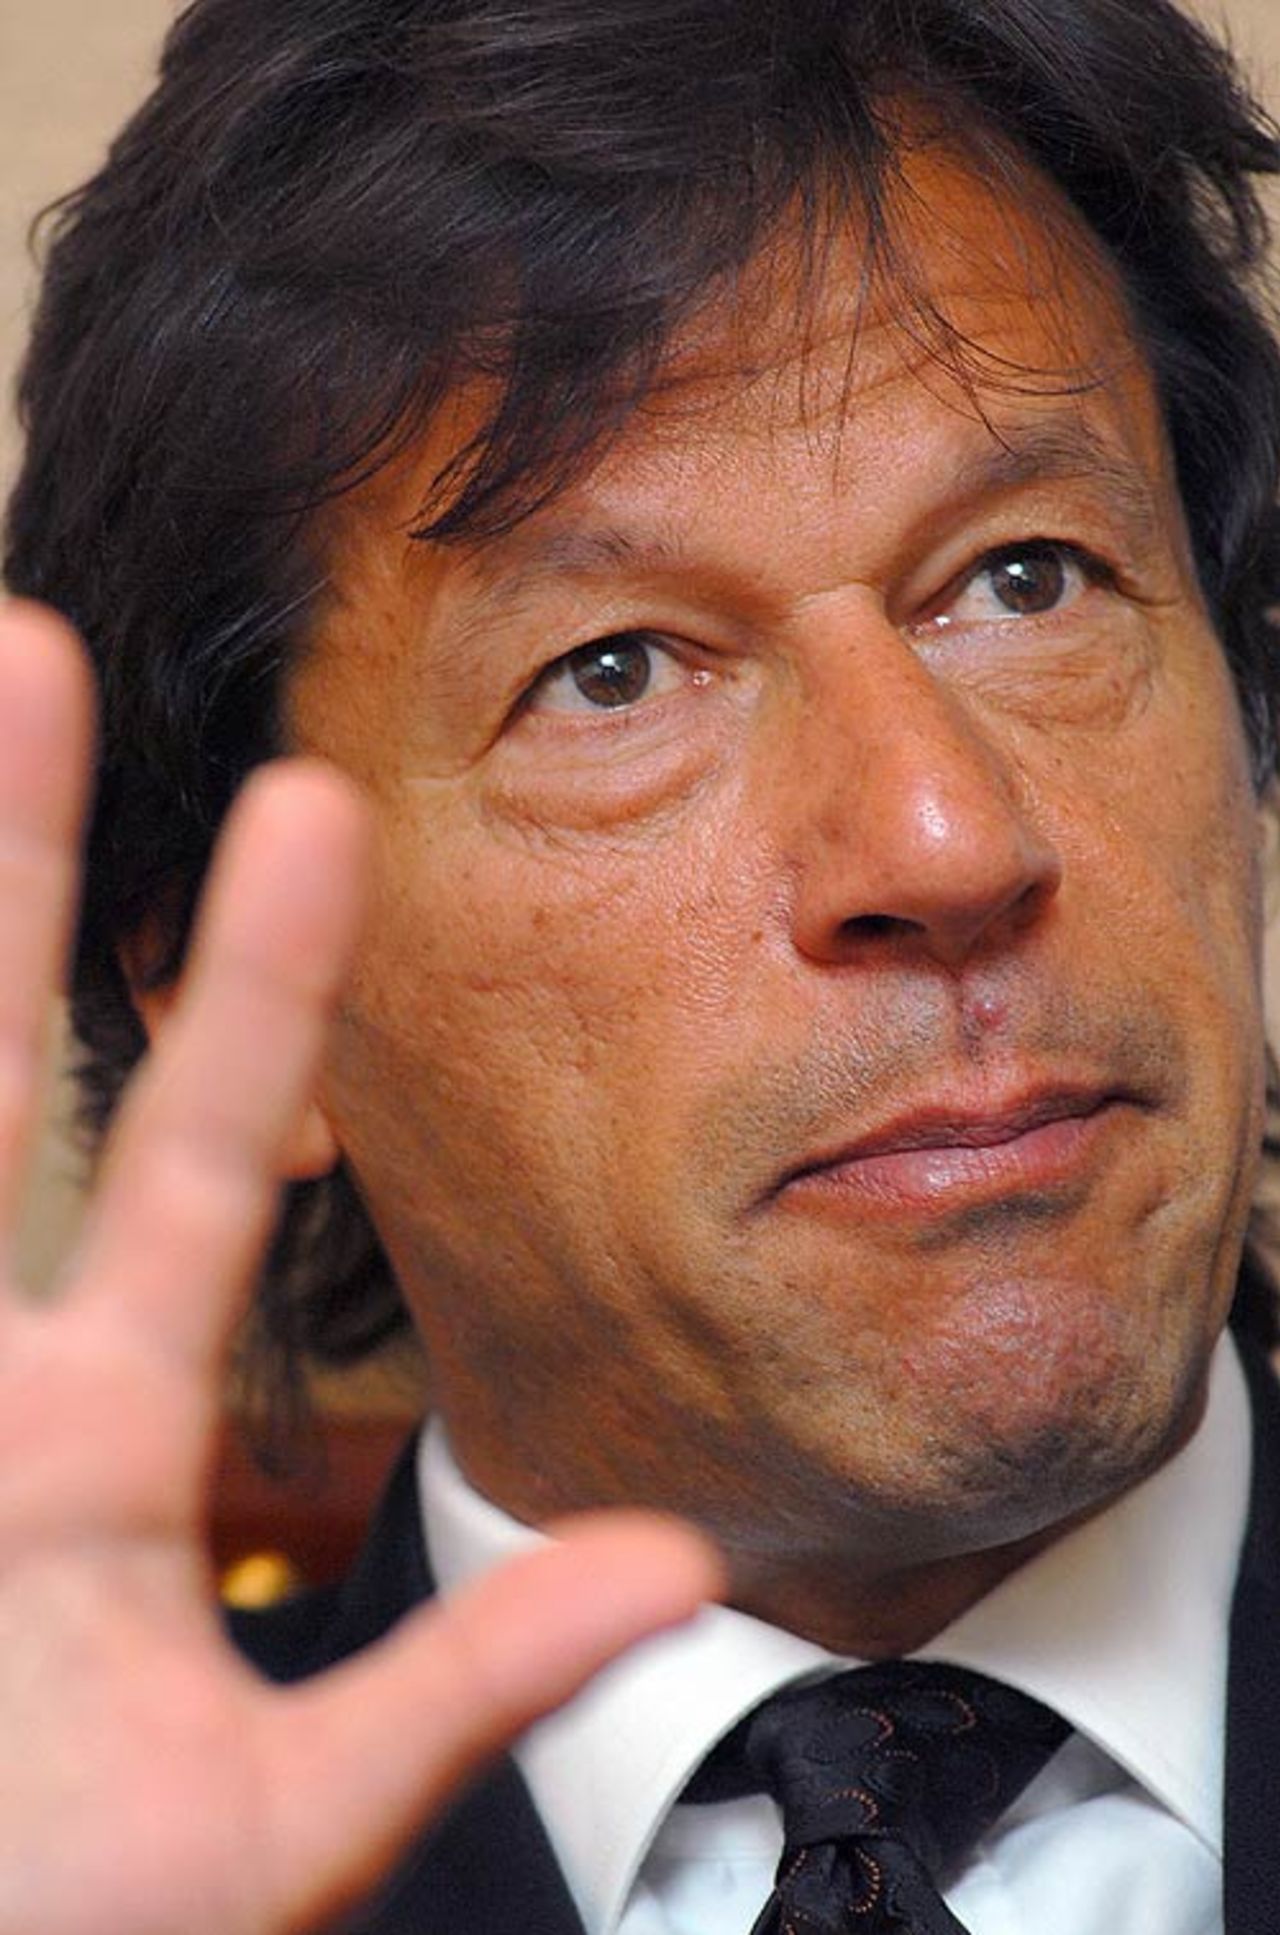 Imran Khan, former captain and now a politician in Pakistan, wants Pakistan Cricket Board to sue Jamaican authorities, June 12, 2007